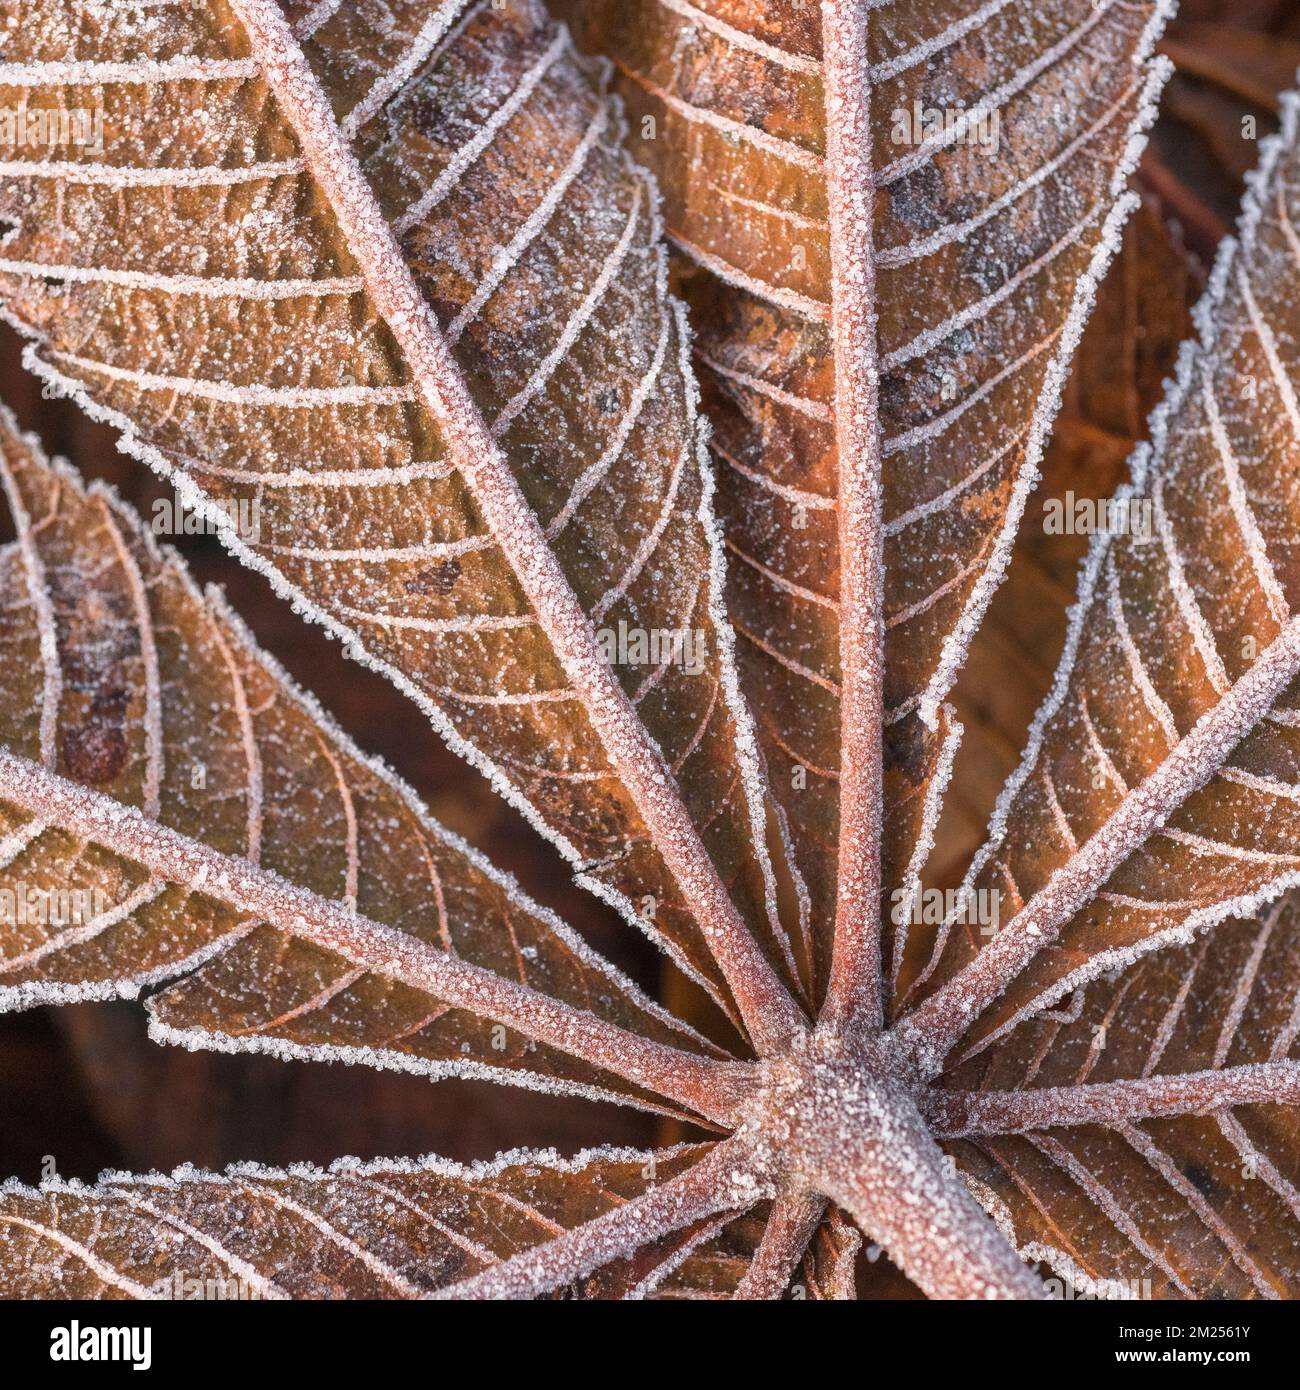 Close-shot of frost covered orange autumnal palmate leaves of Horse Chestnut / Aesculus hippocastanum, once used medicinally. Early rising Autumn sun. Stock Photo